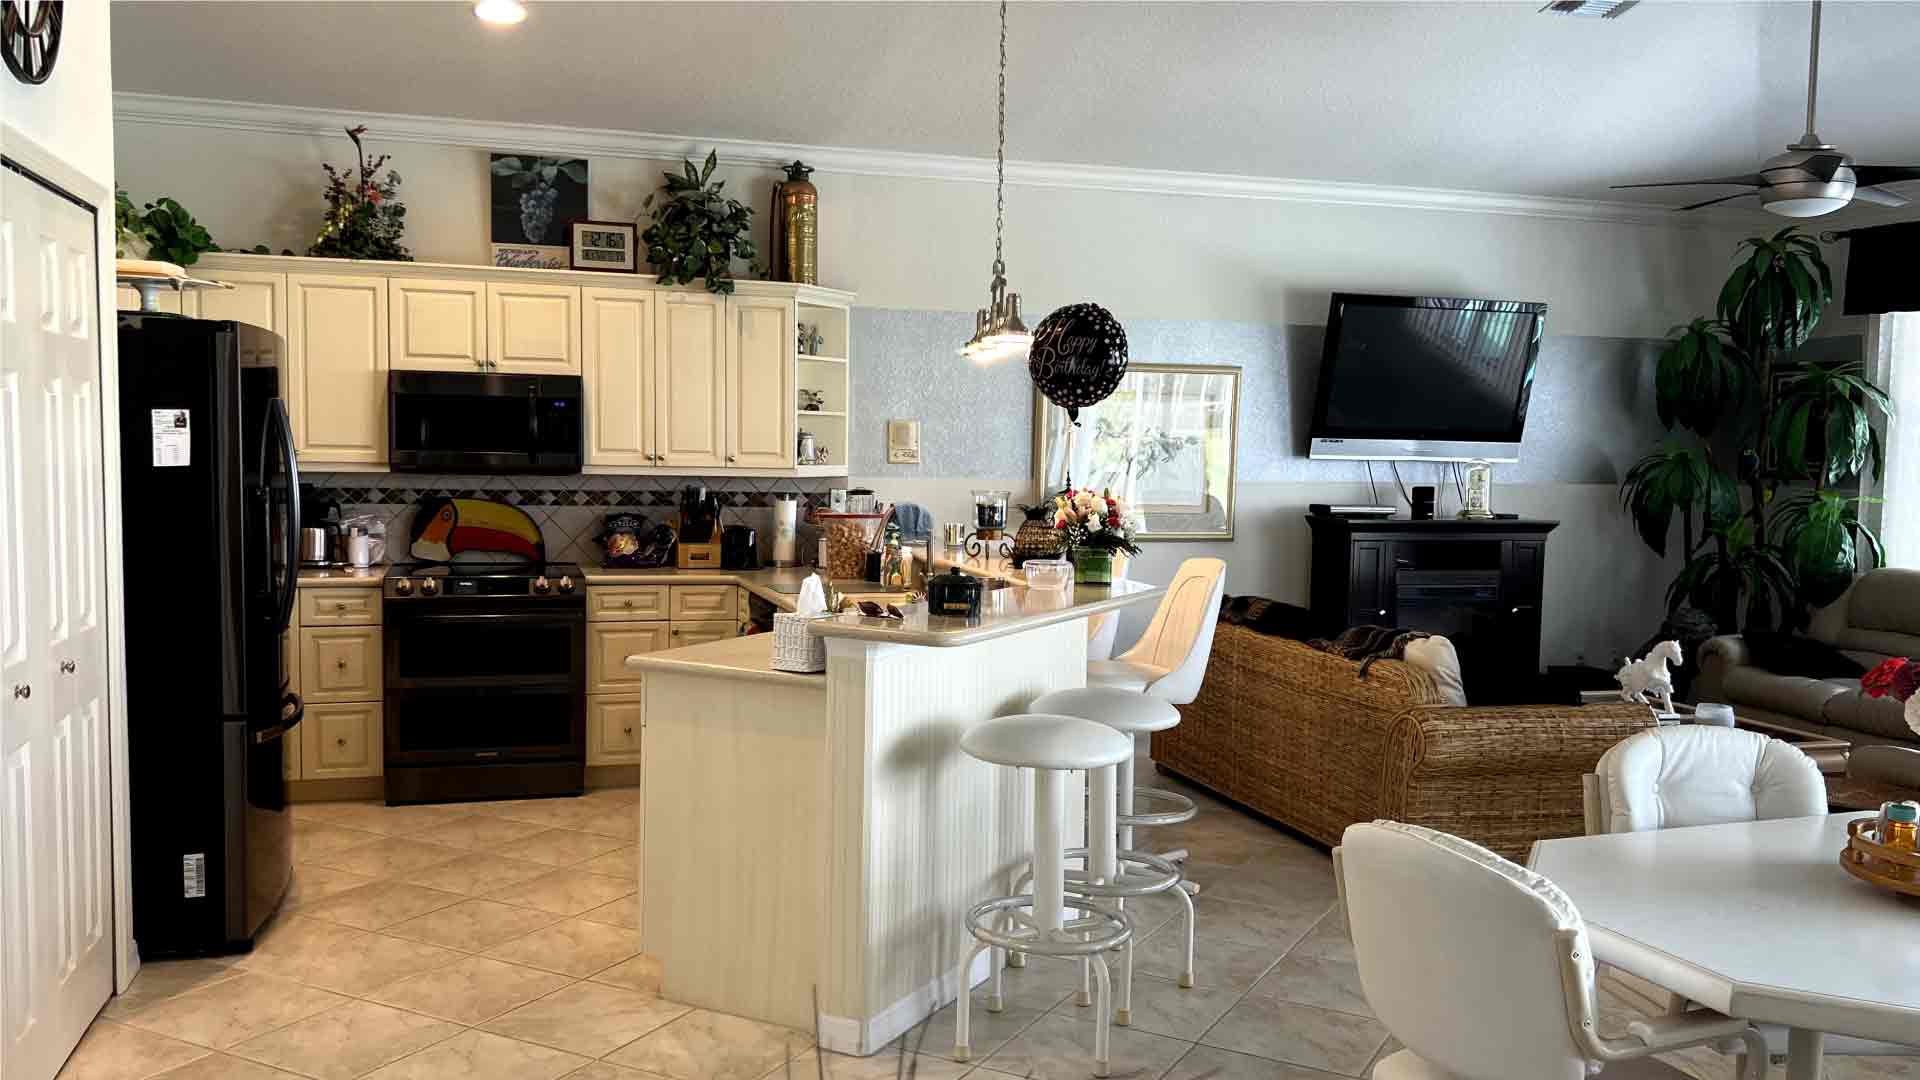 Kitchen cleaning - Regular cleaning in Cape Coral by Goldmillio - Feb 26